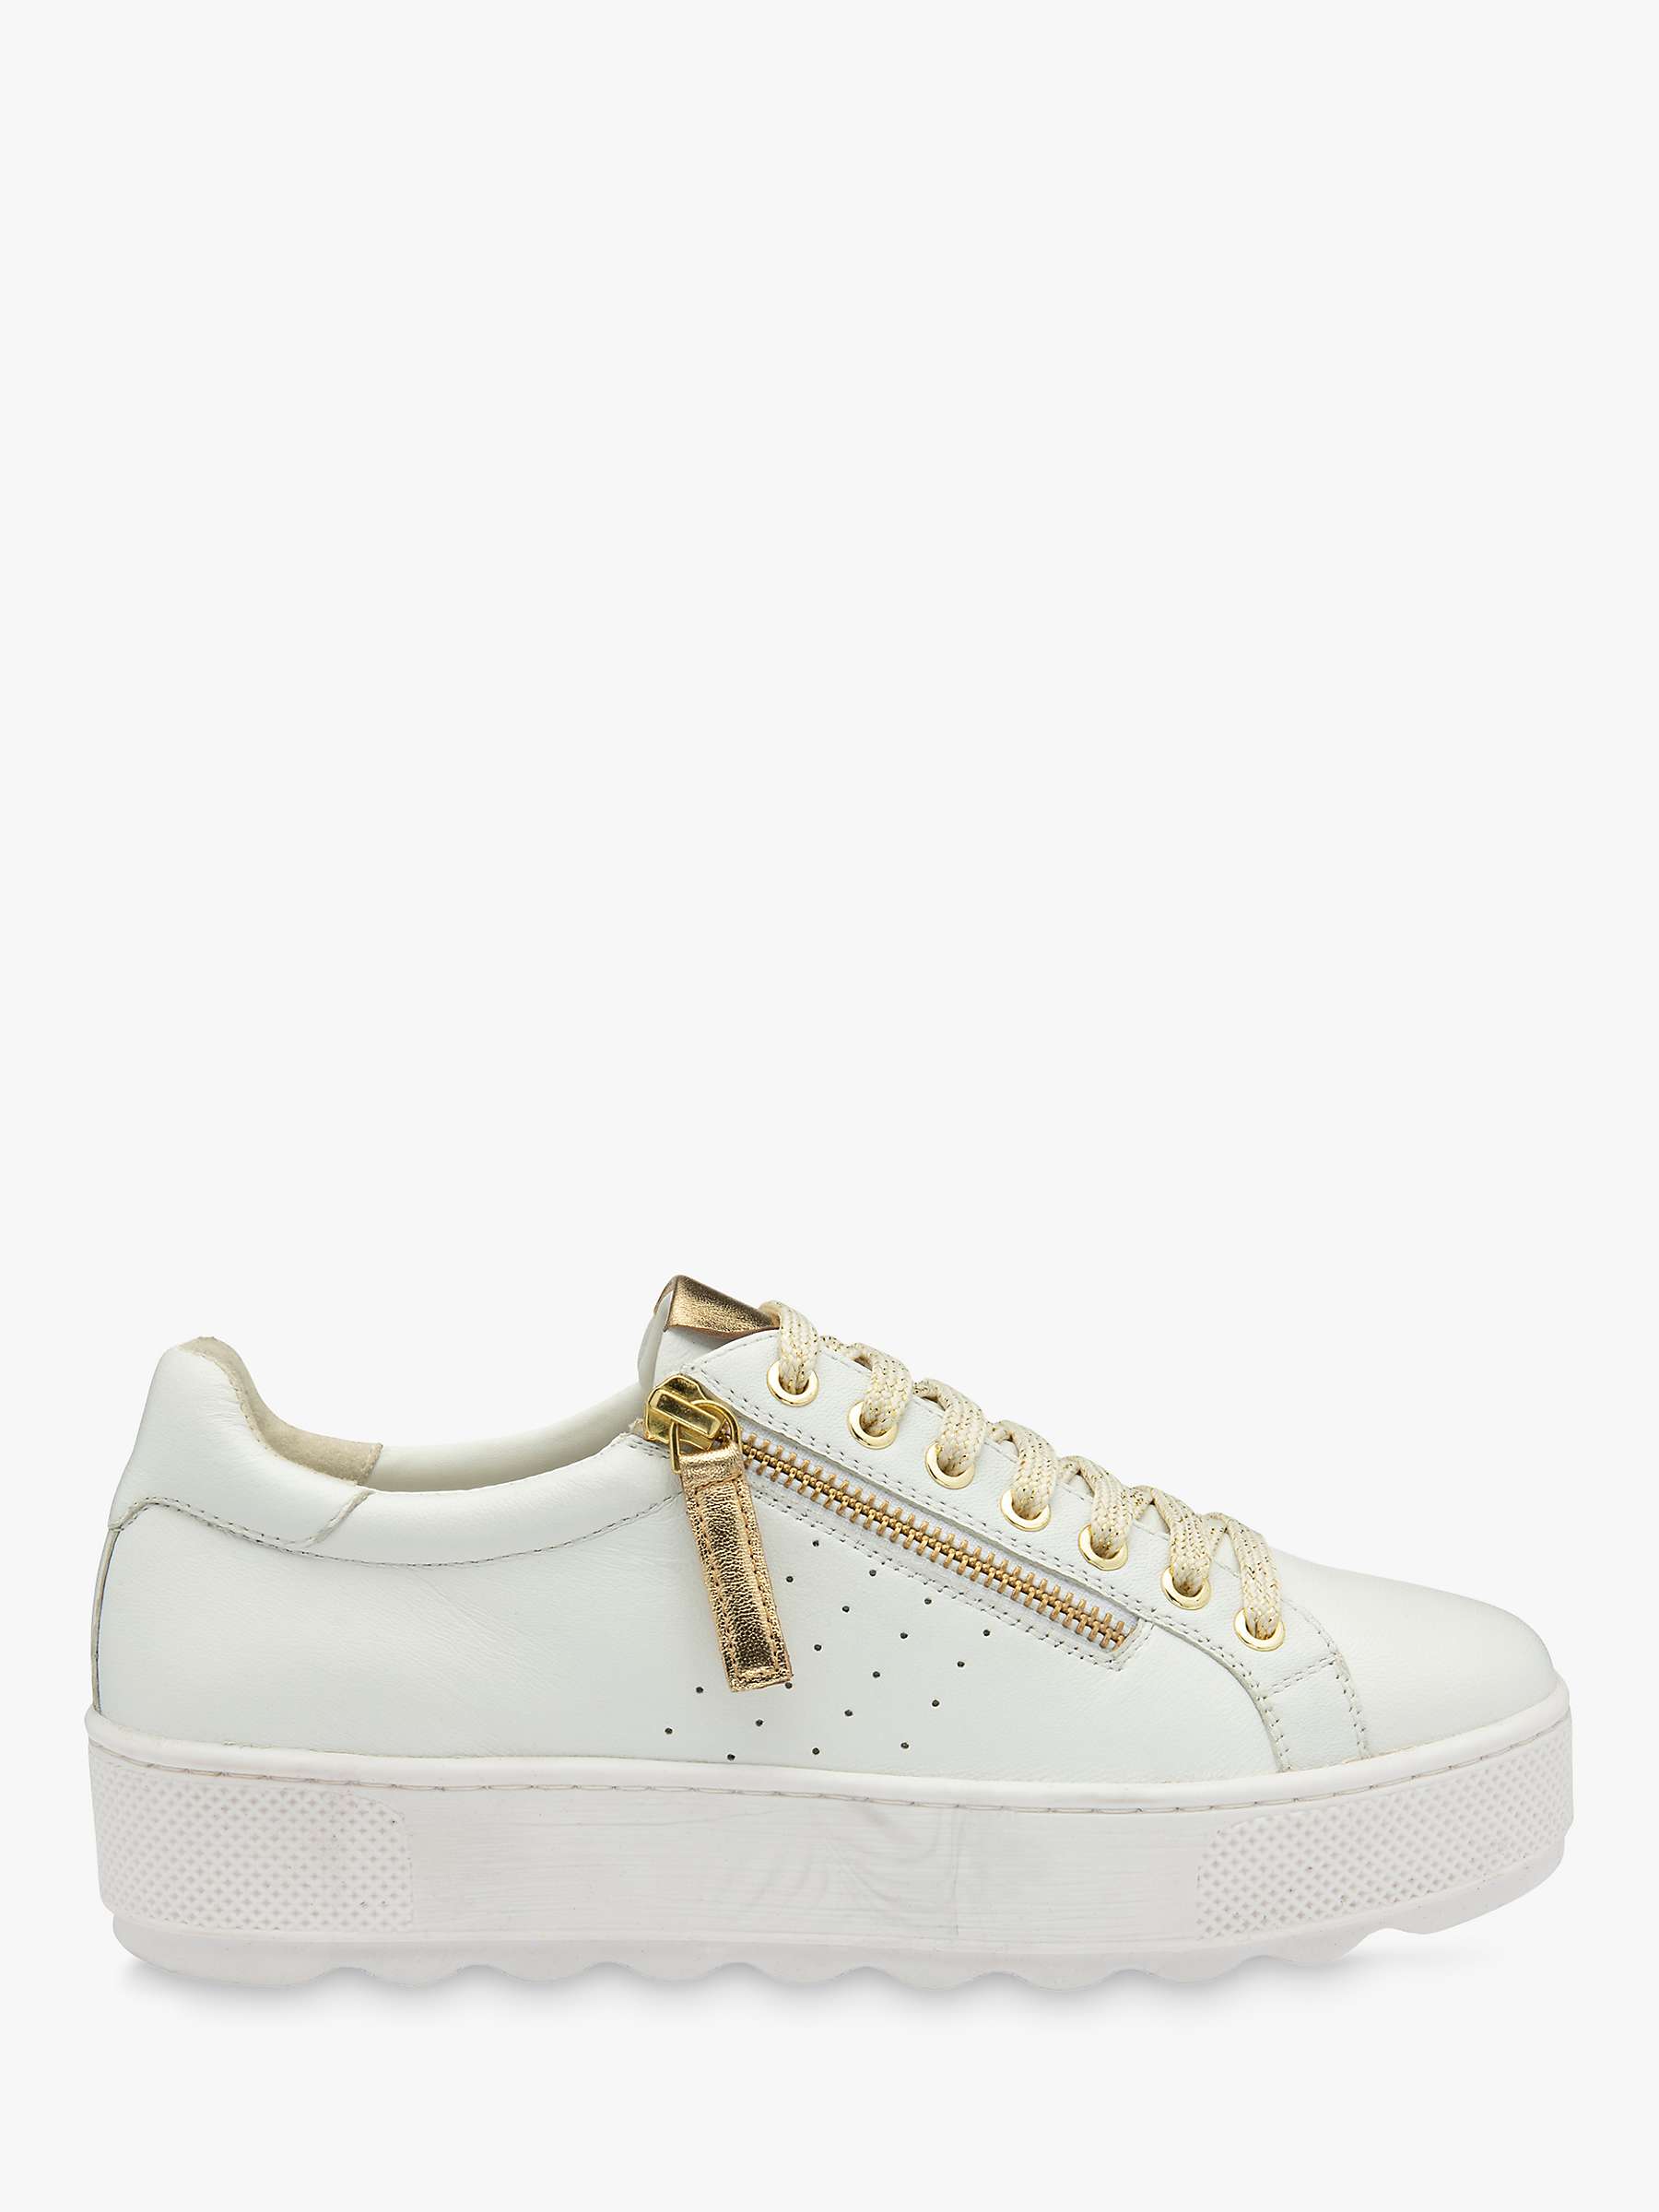 Buy Ravel Calton Leather Trainers, White Online at johnlewis.com